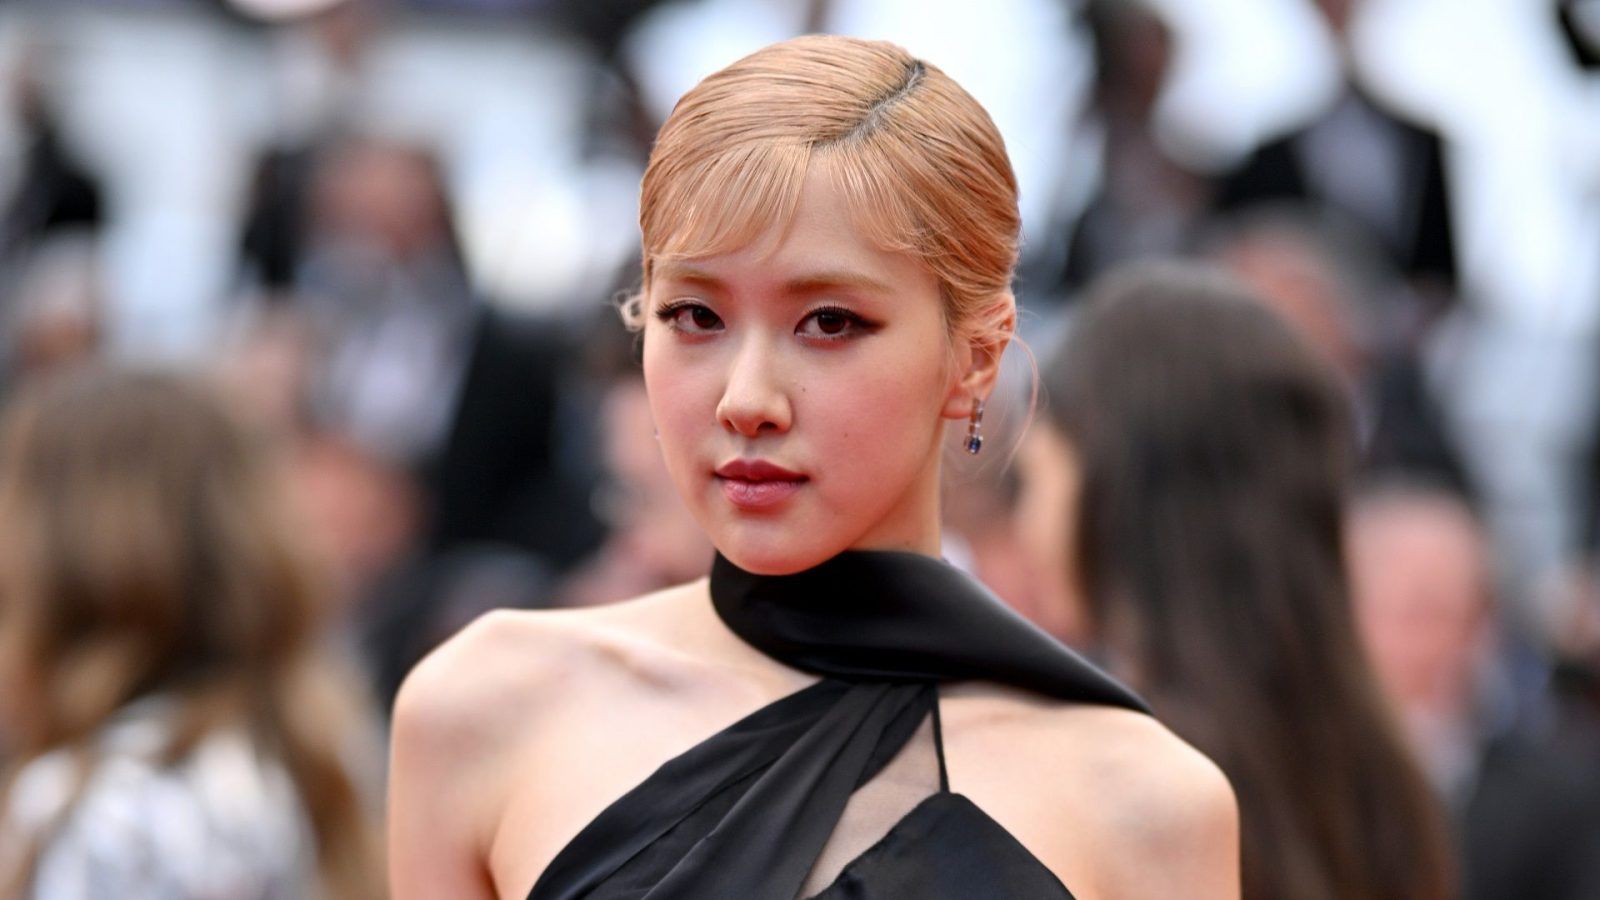 Vintage Asian Celebrity Nudes - RosÃ© and all the Asian celebrities who attended 2023 Cannes Film Festival